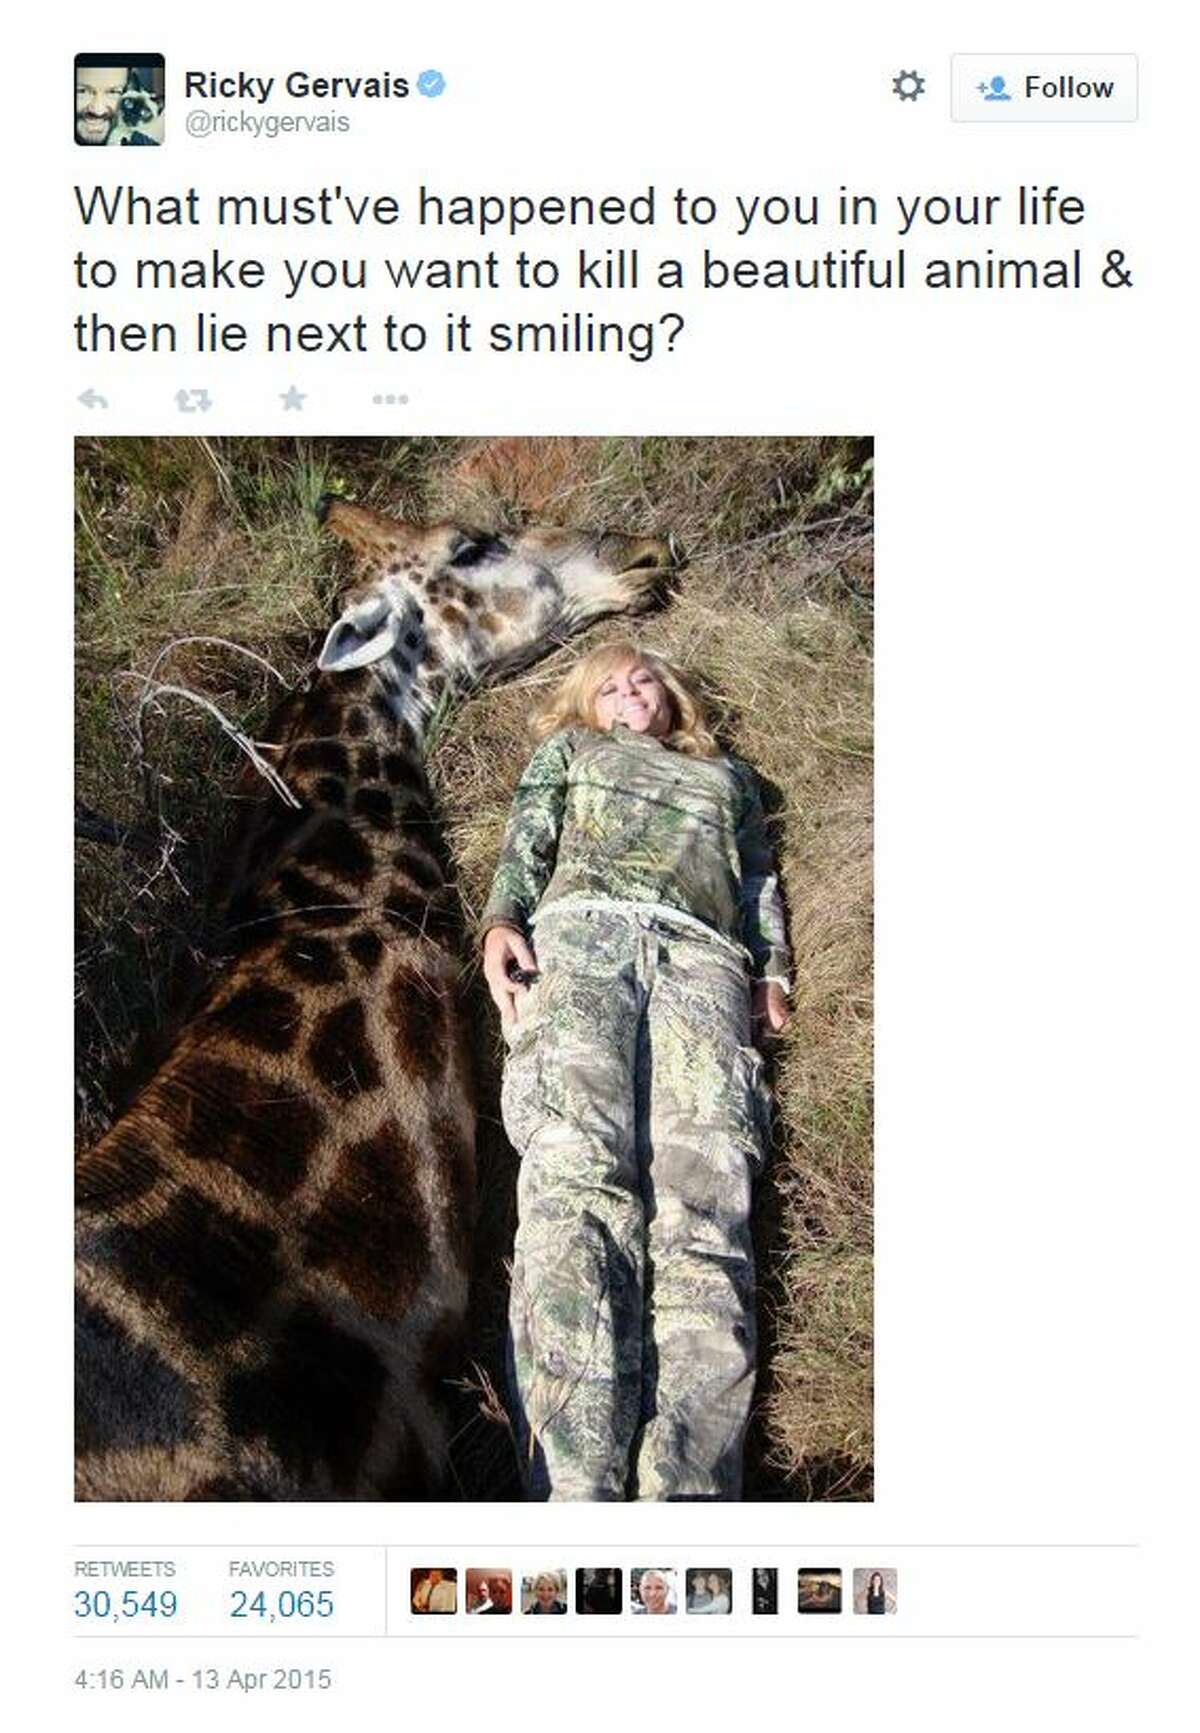 Rebecca Francis is seen here with a giraffe she recently killed in Africa. She said the animal was close to dying and she honored the animal by killing him. But she's receiving a lot of flak for the photos and killing.